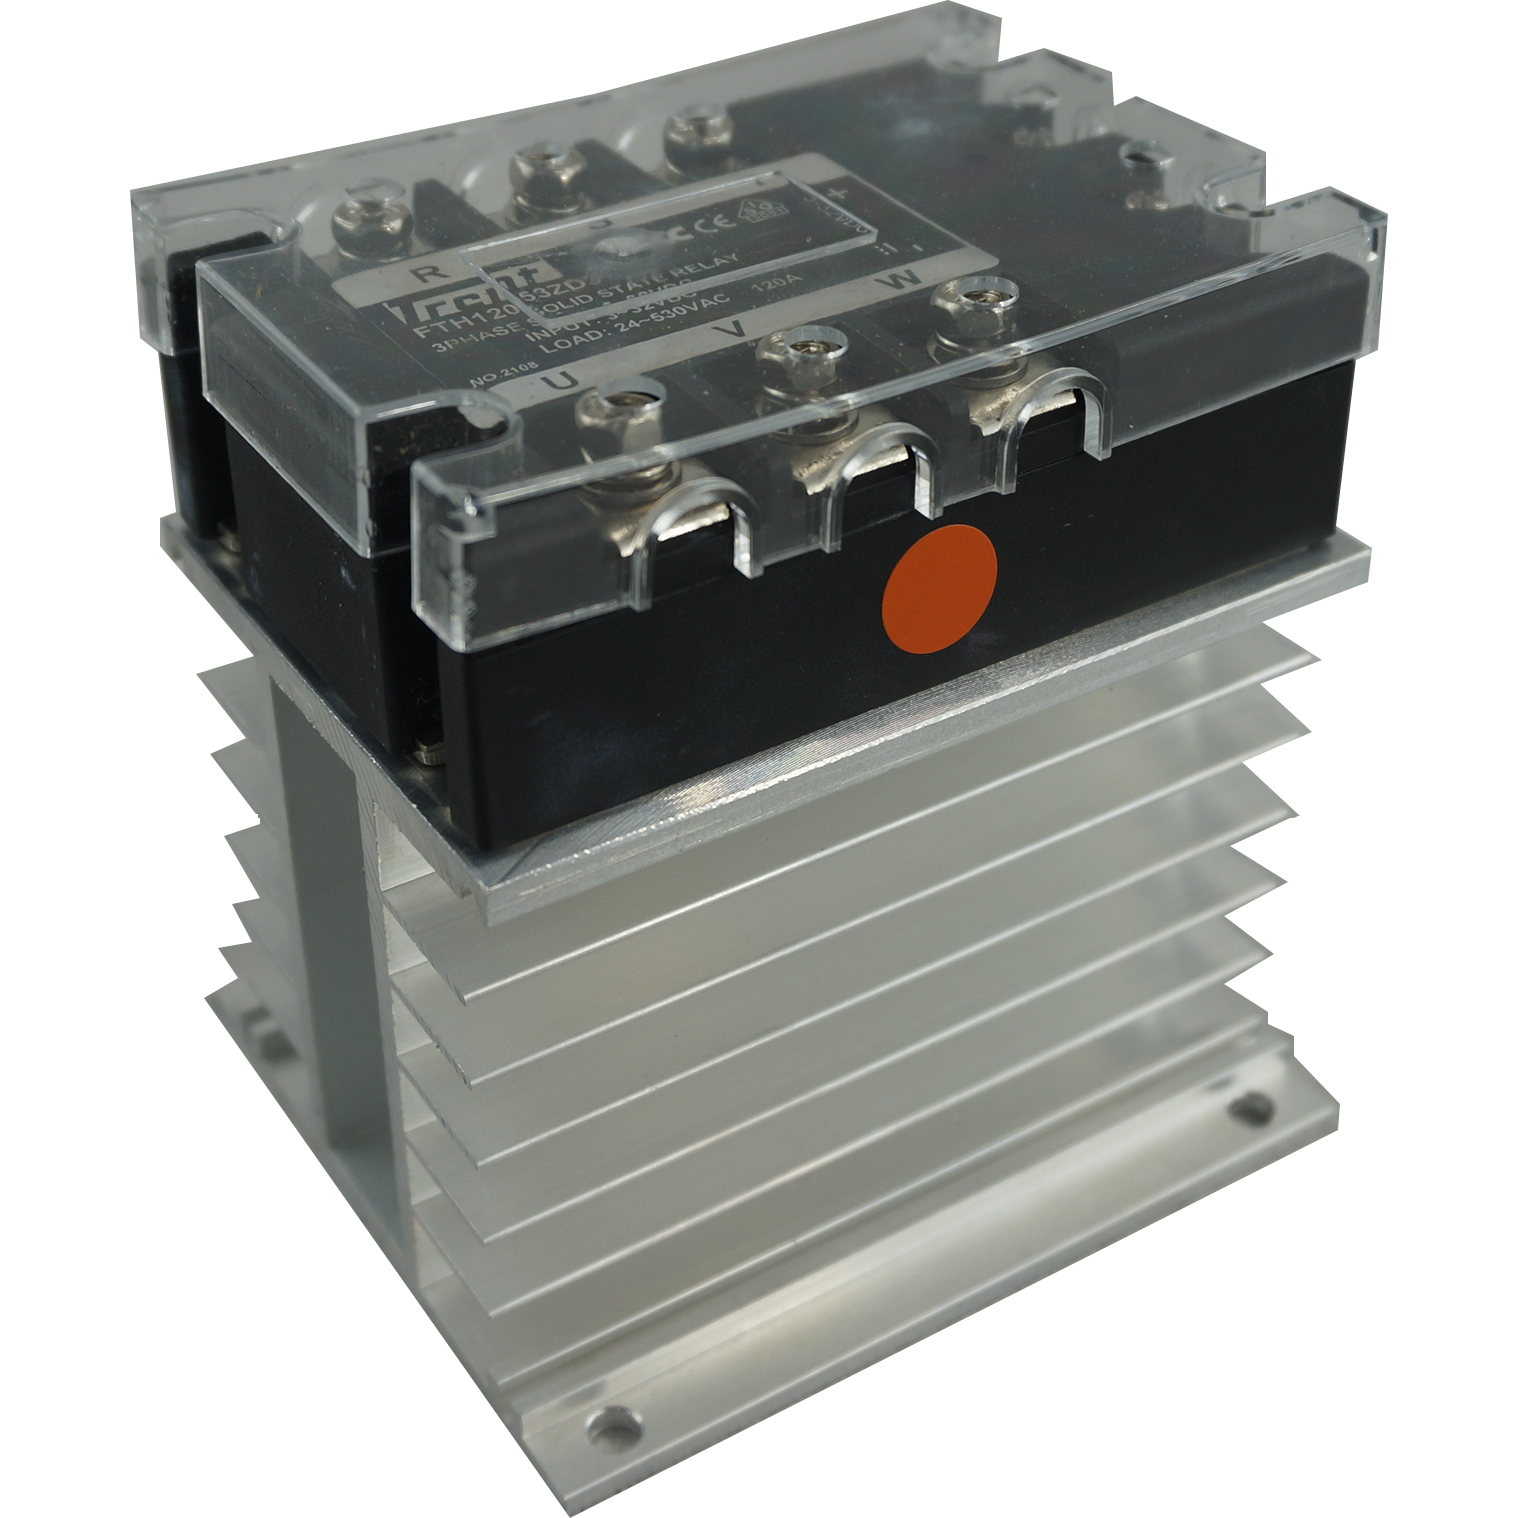 FTH2553ZA4 + HS212, Solid State Relay, and Heatsink Assembly, 3 Phase 90-280VAC Control, 20 Amp per phase @ 40 Deg C, 48-530VAC Load, LED Status Indicator, with IP20 Cover